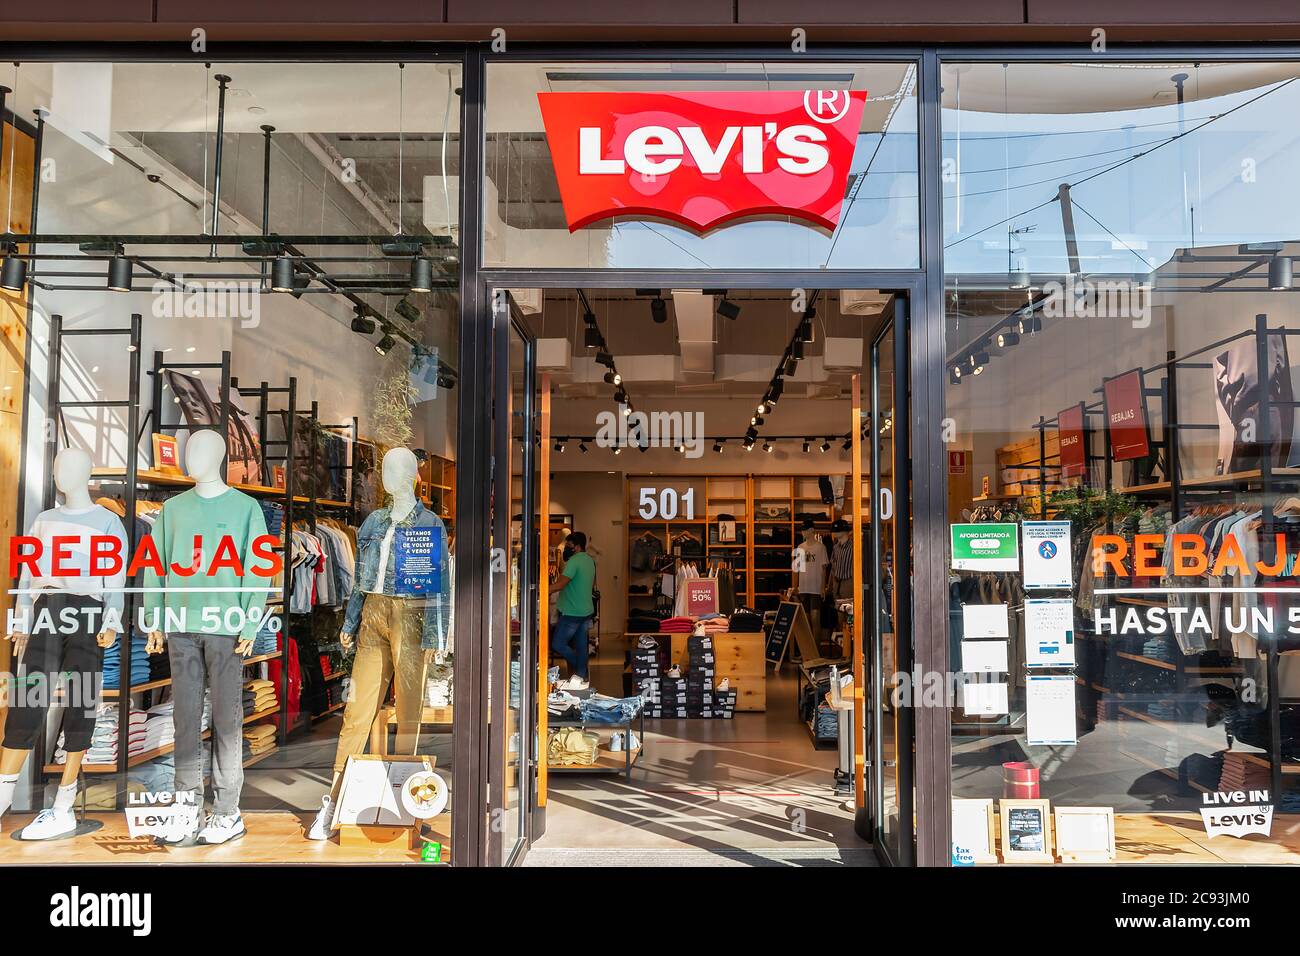 Huelva, Spain - July 27, 2020: A Levi's Store in Holea Shopping center.  Levi's is an American maker and retailer of denim clothing Stock Photo -  Alamy